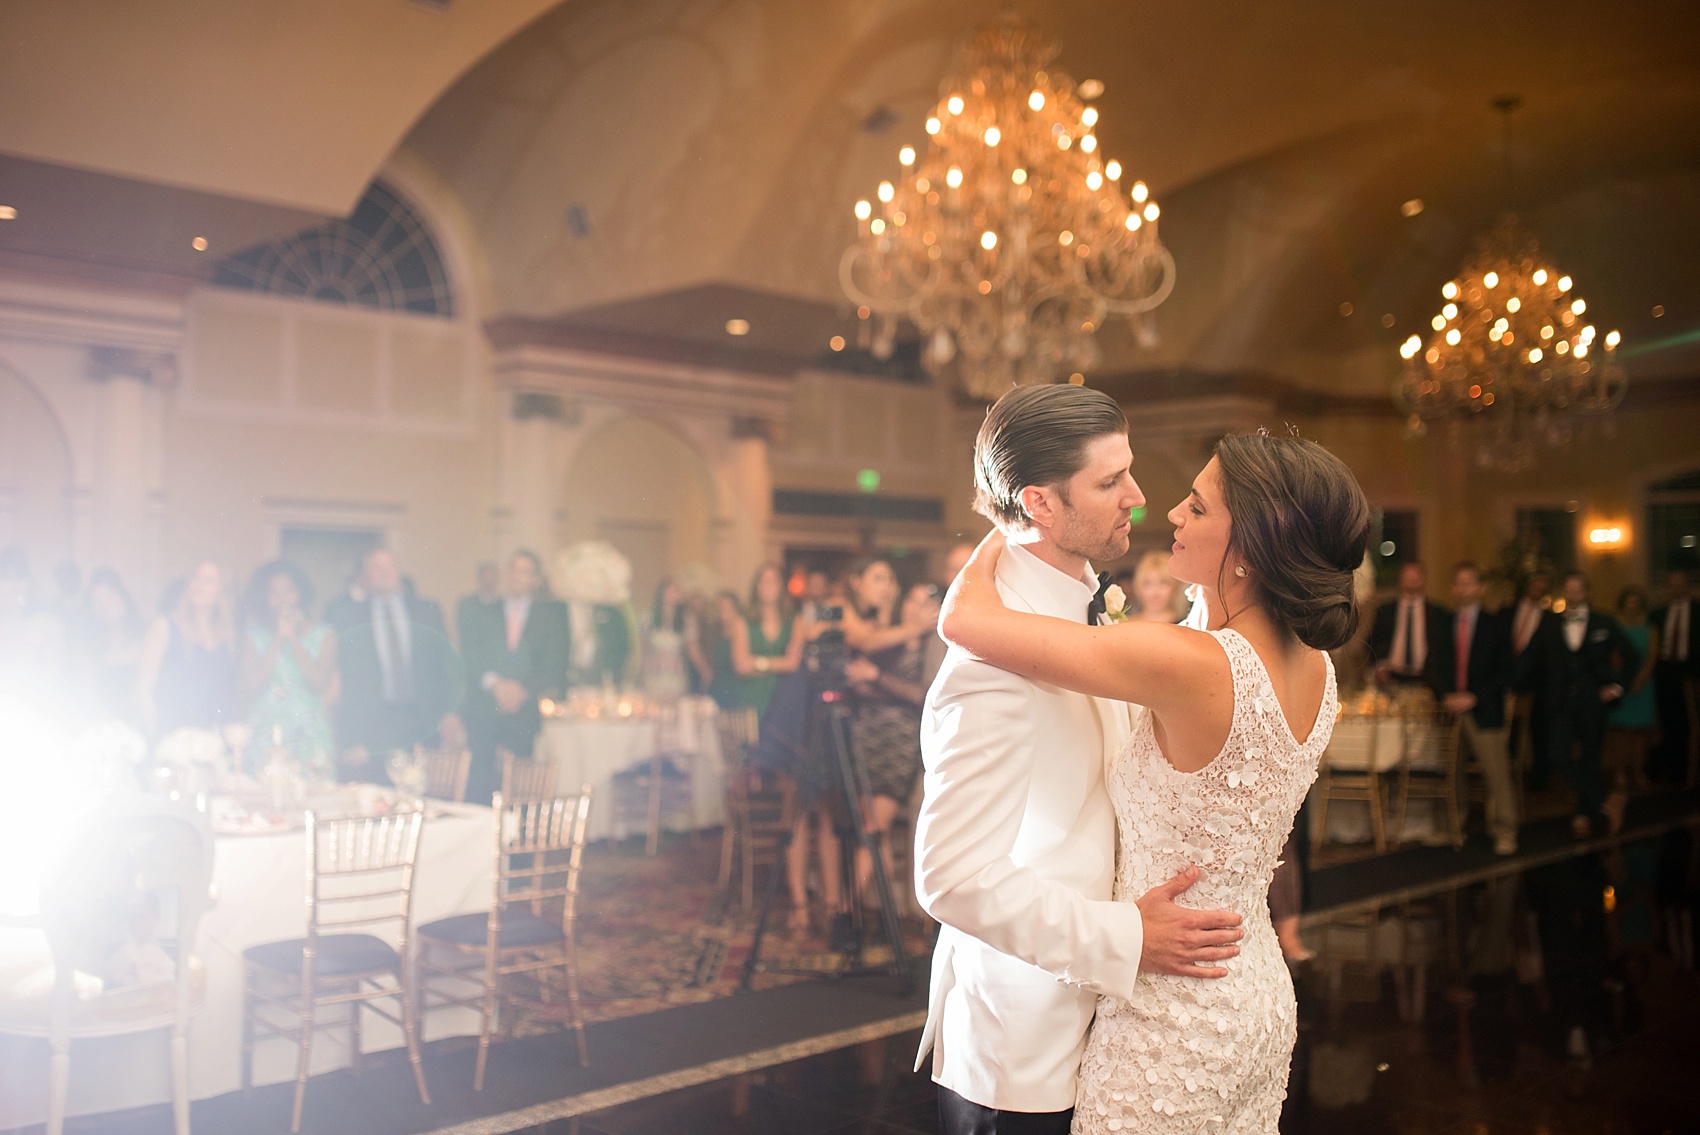 First dance with bridesmaids serenade for a wedding at The Riverview, Connecticut. Images by NYC wedding photographer Mikkel Paige Photography. Flowers by Diane Gaudett.